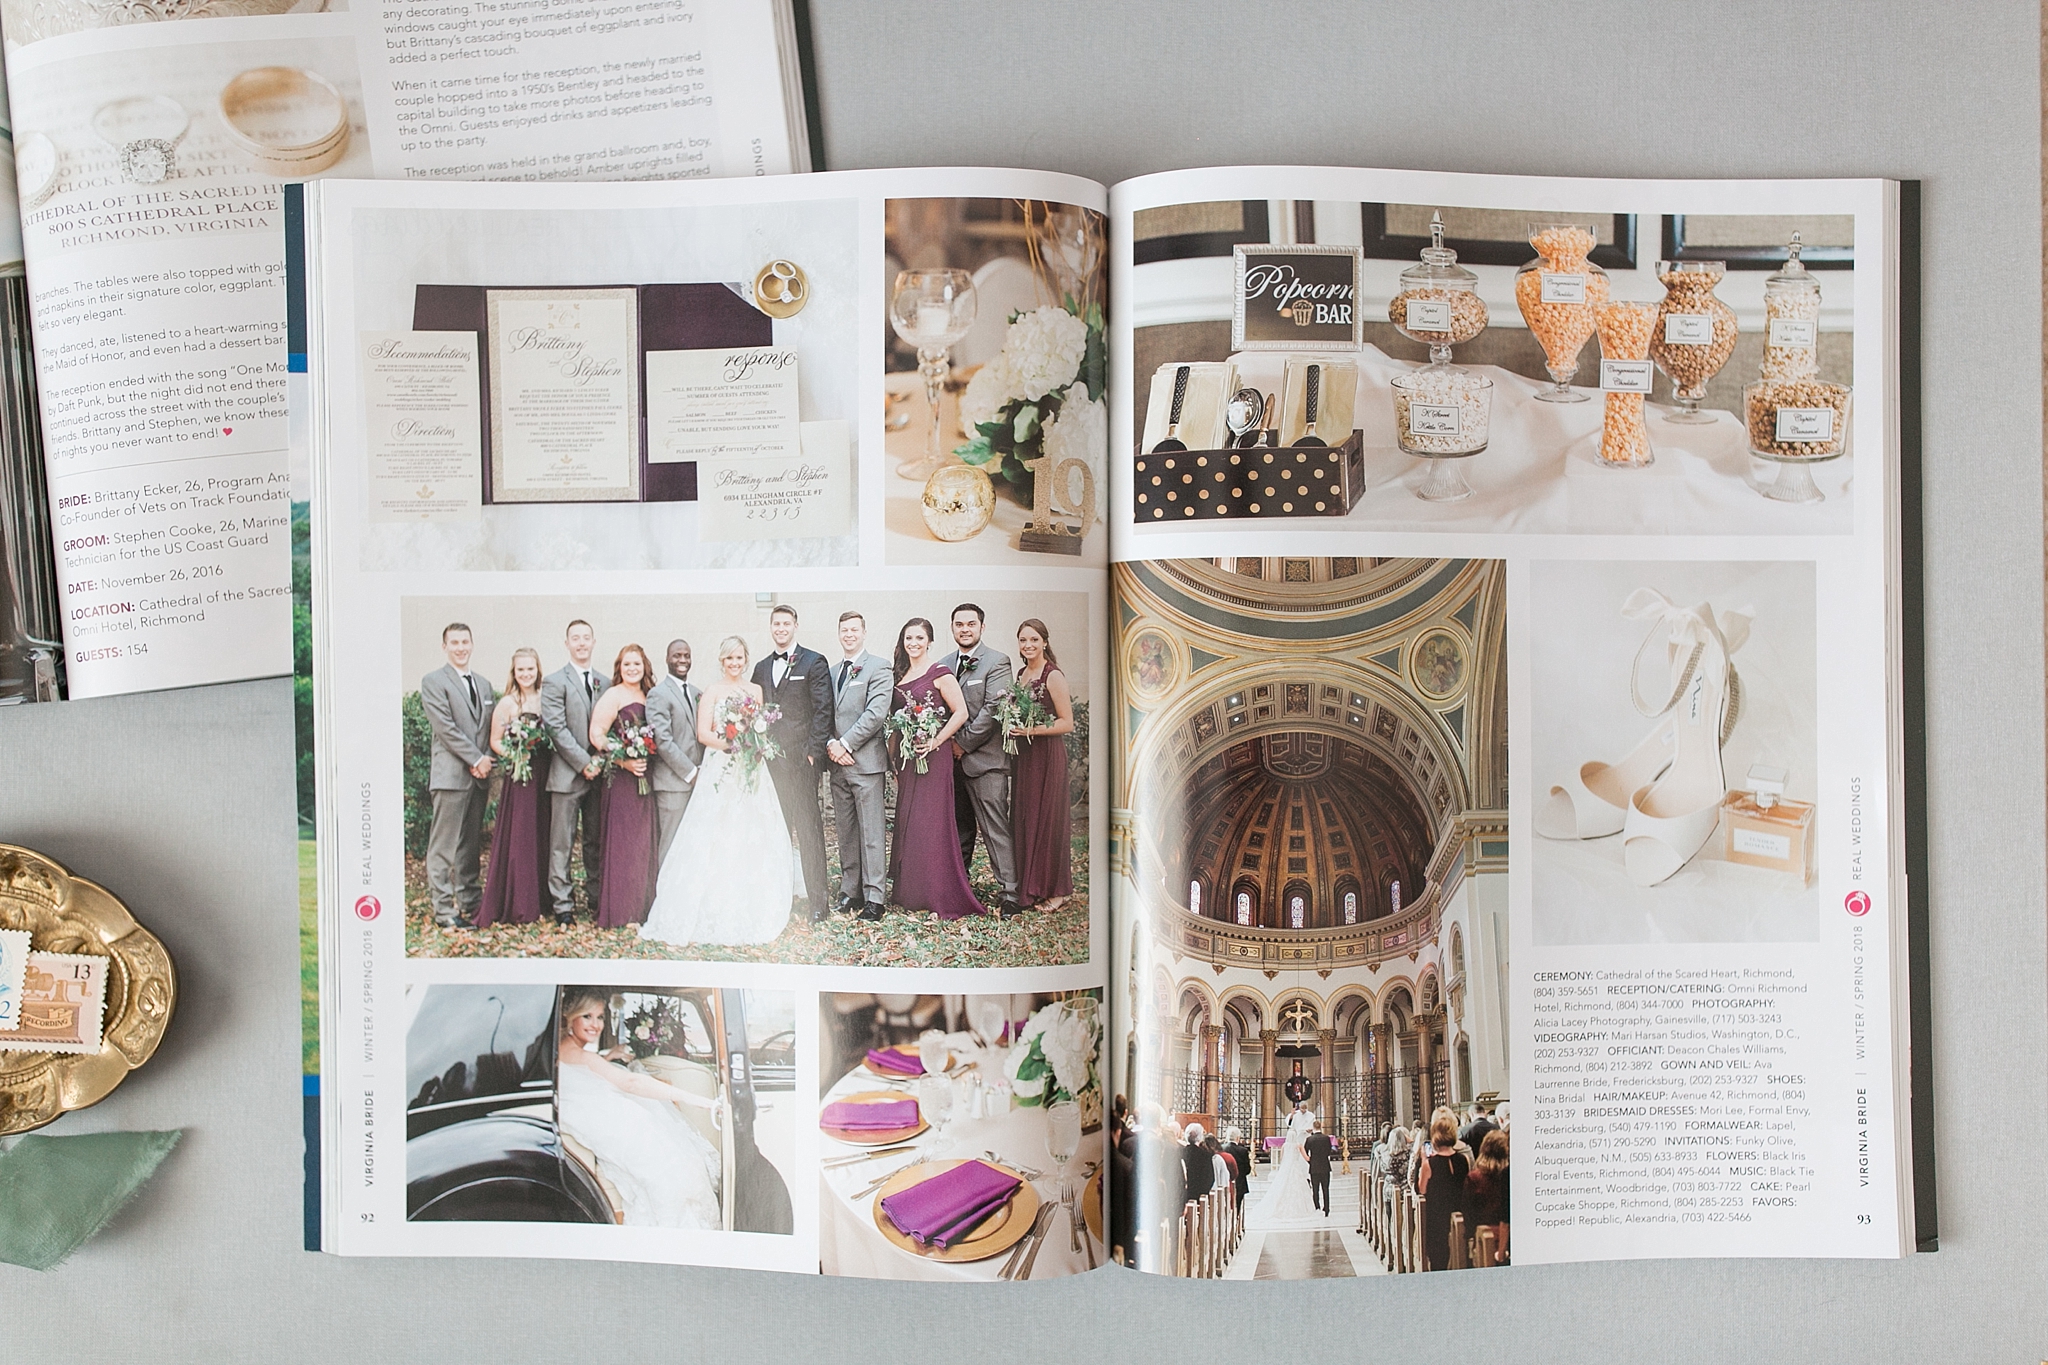 A wedding photographed at The Cathedral of the Sacred Heart and Omni Richmond Hotel is featured in the recent issue of Virginia Bride Magazine. 